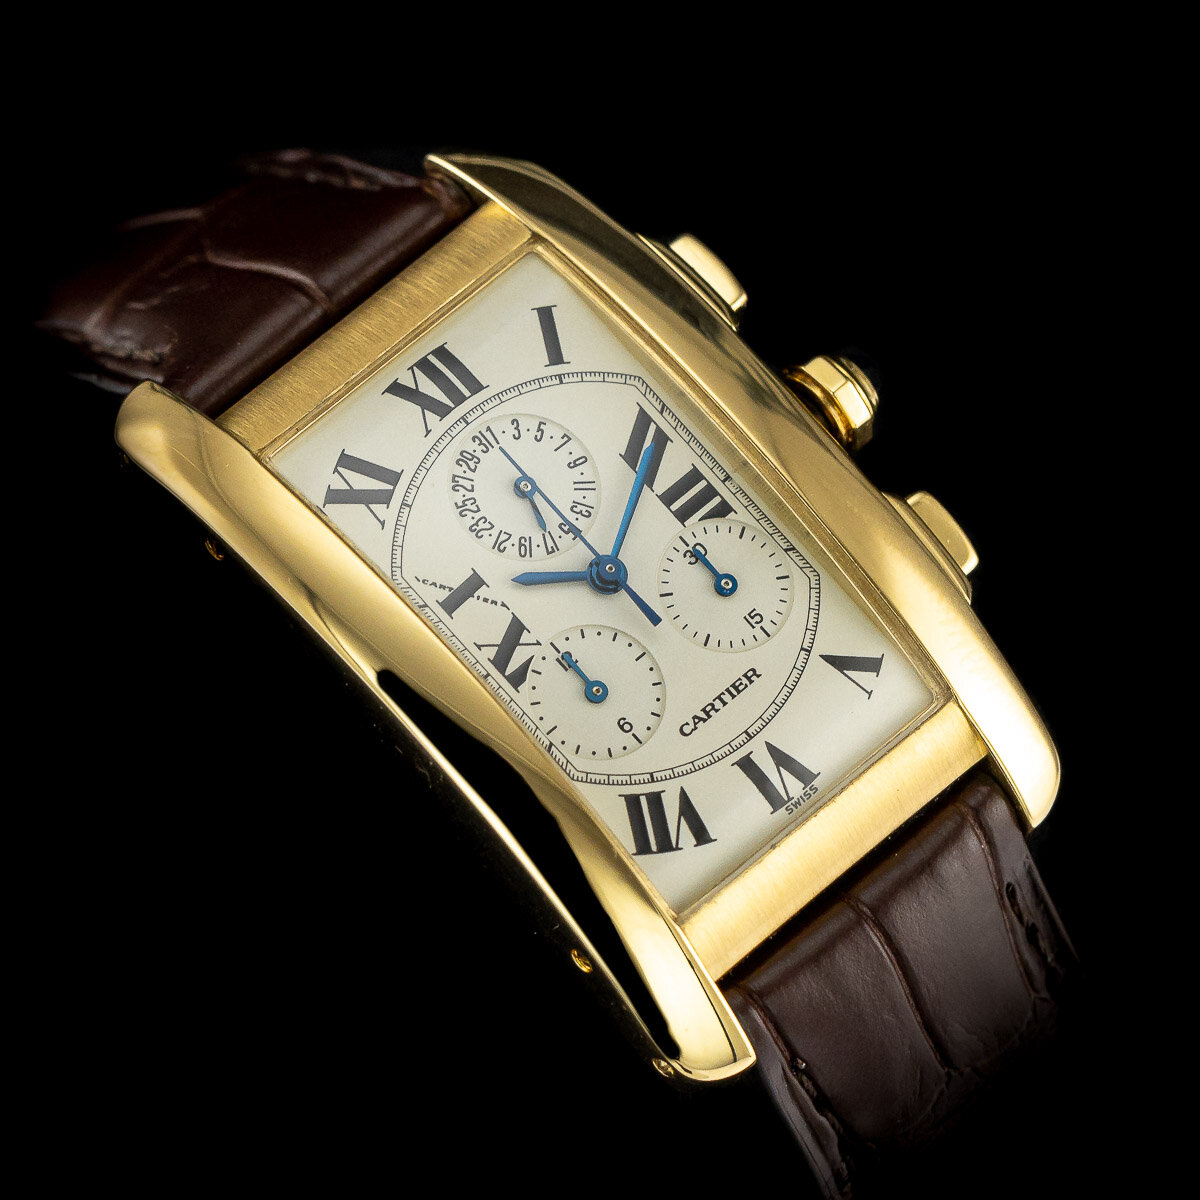 Regal Time — Cartier Tank Americaine WB710002